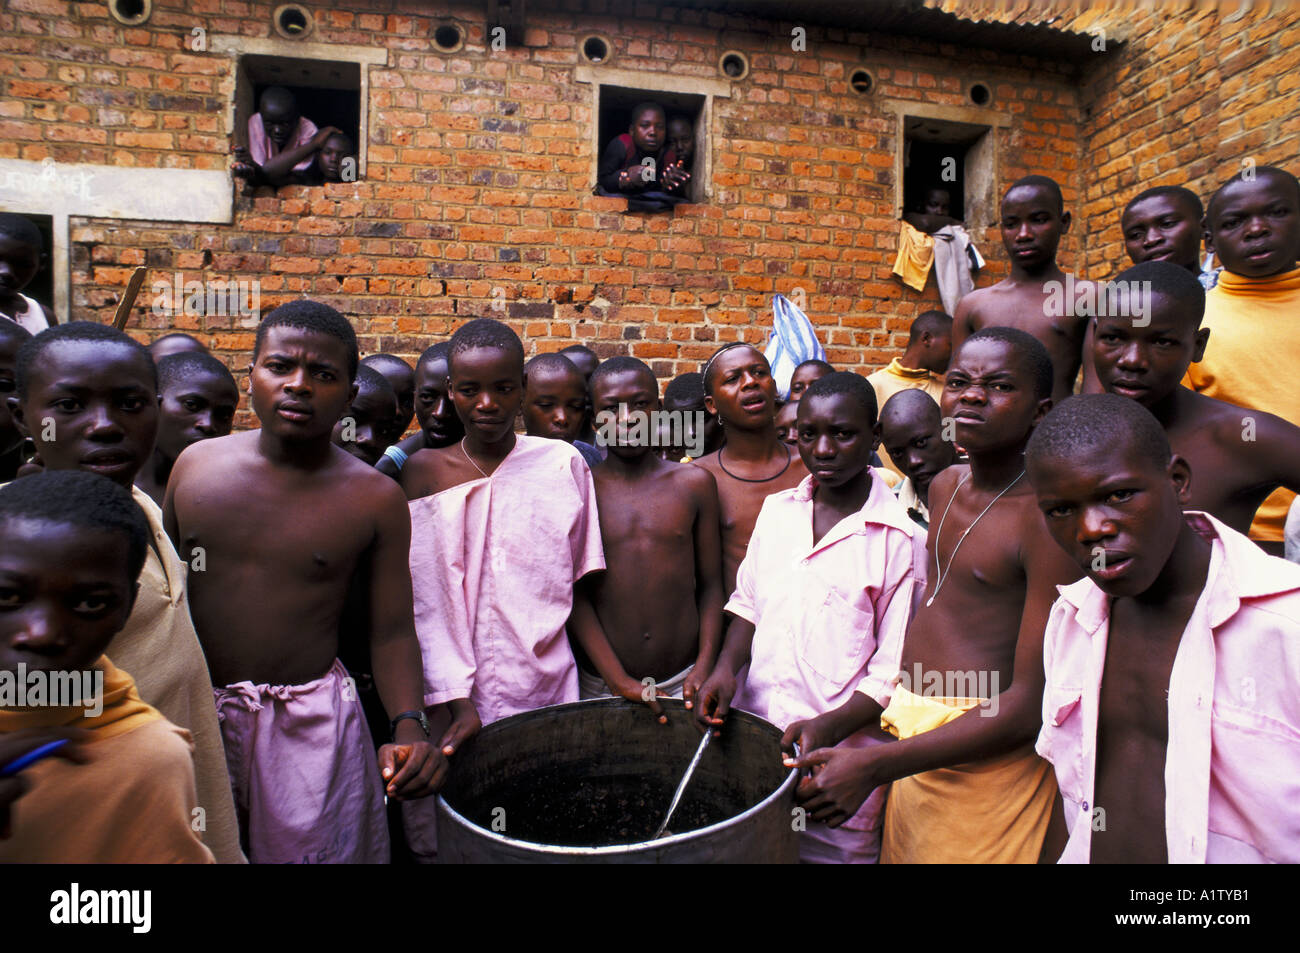 KIGALI PRISON CHILDREN'S SECTION 1995.Children accused of participation in the genocide Stock Photo